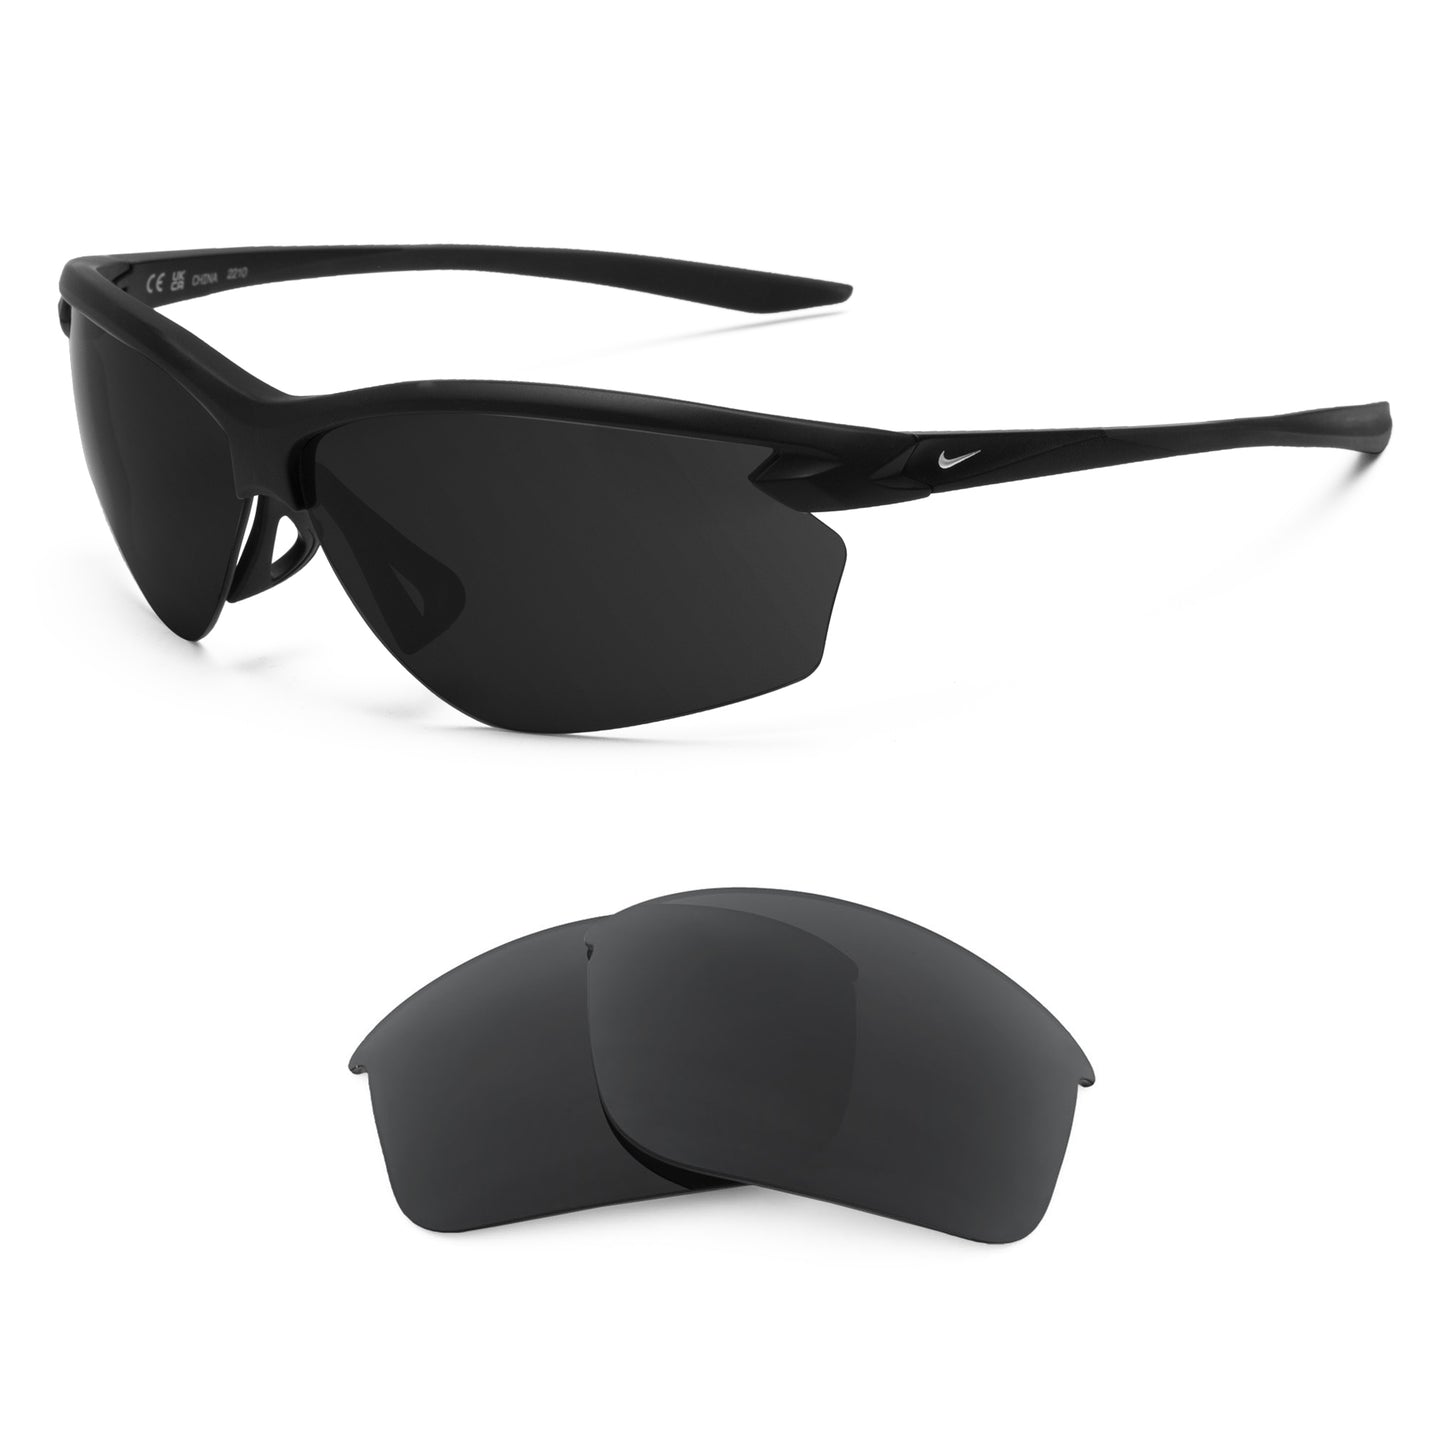 Nike Victory sunglasses with replacement lenses